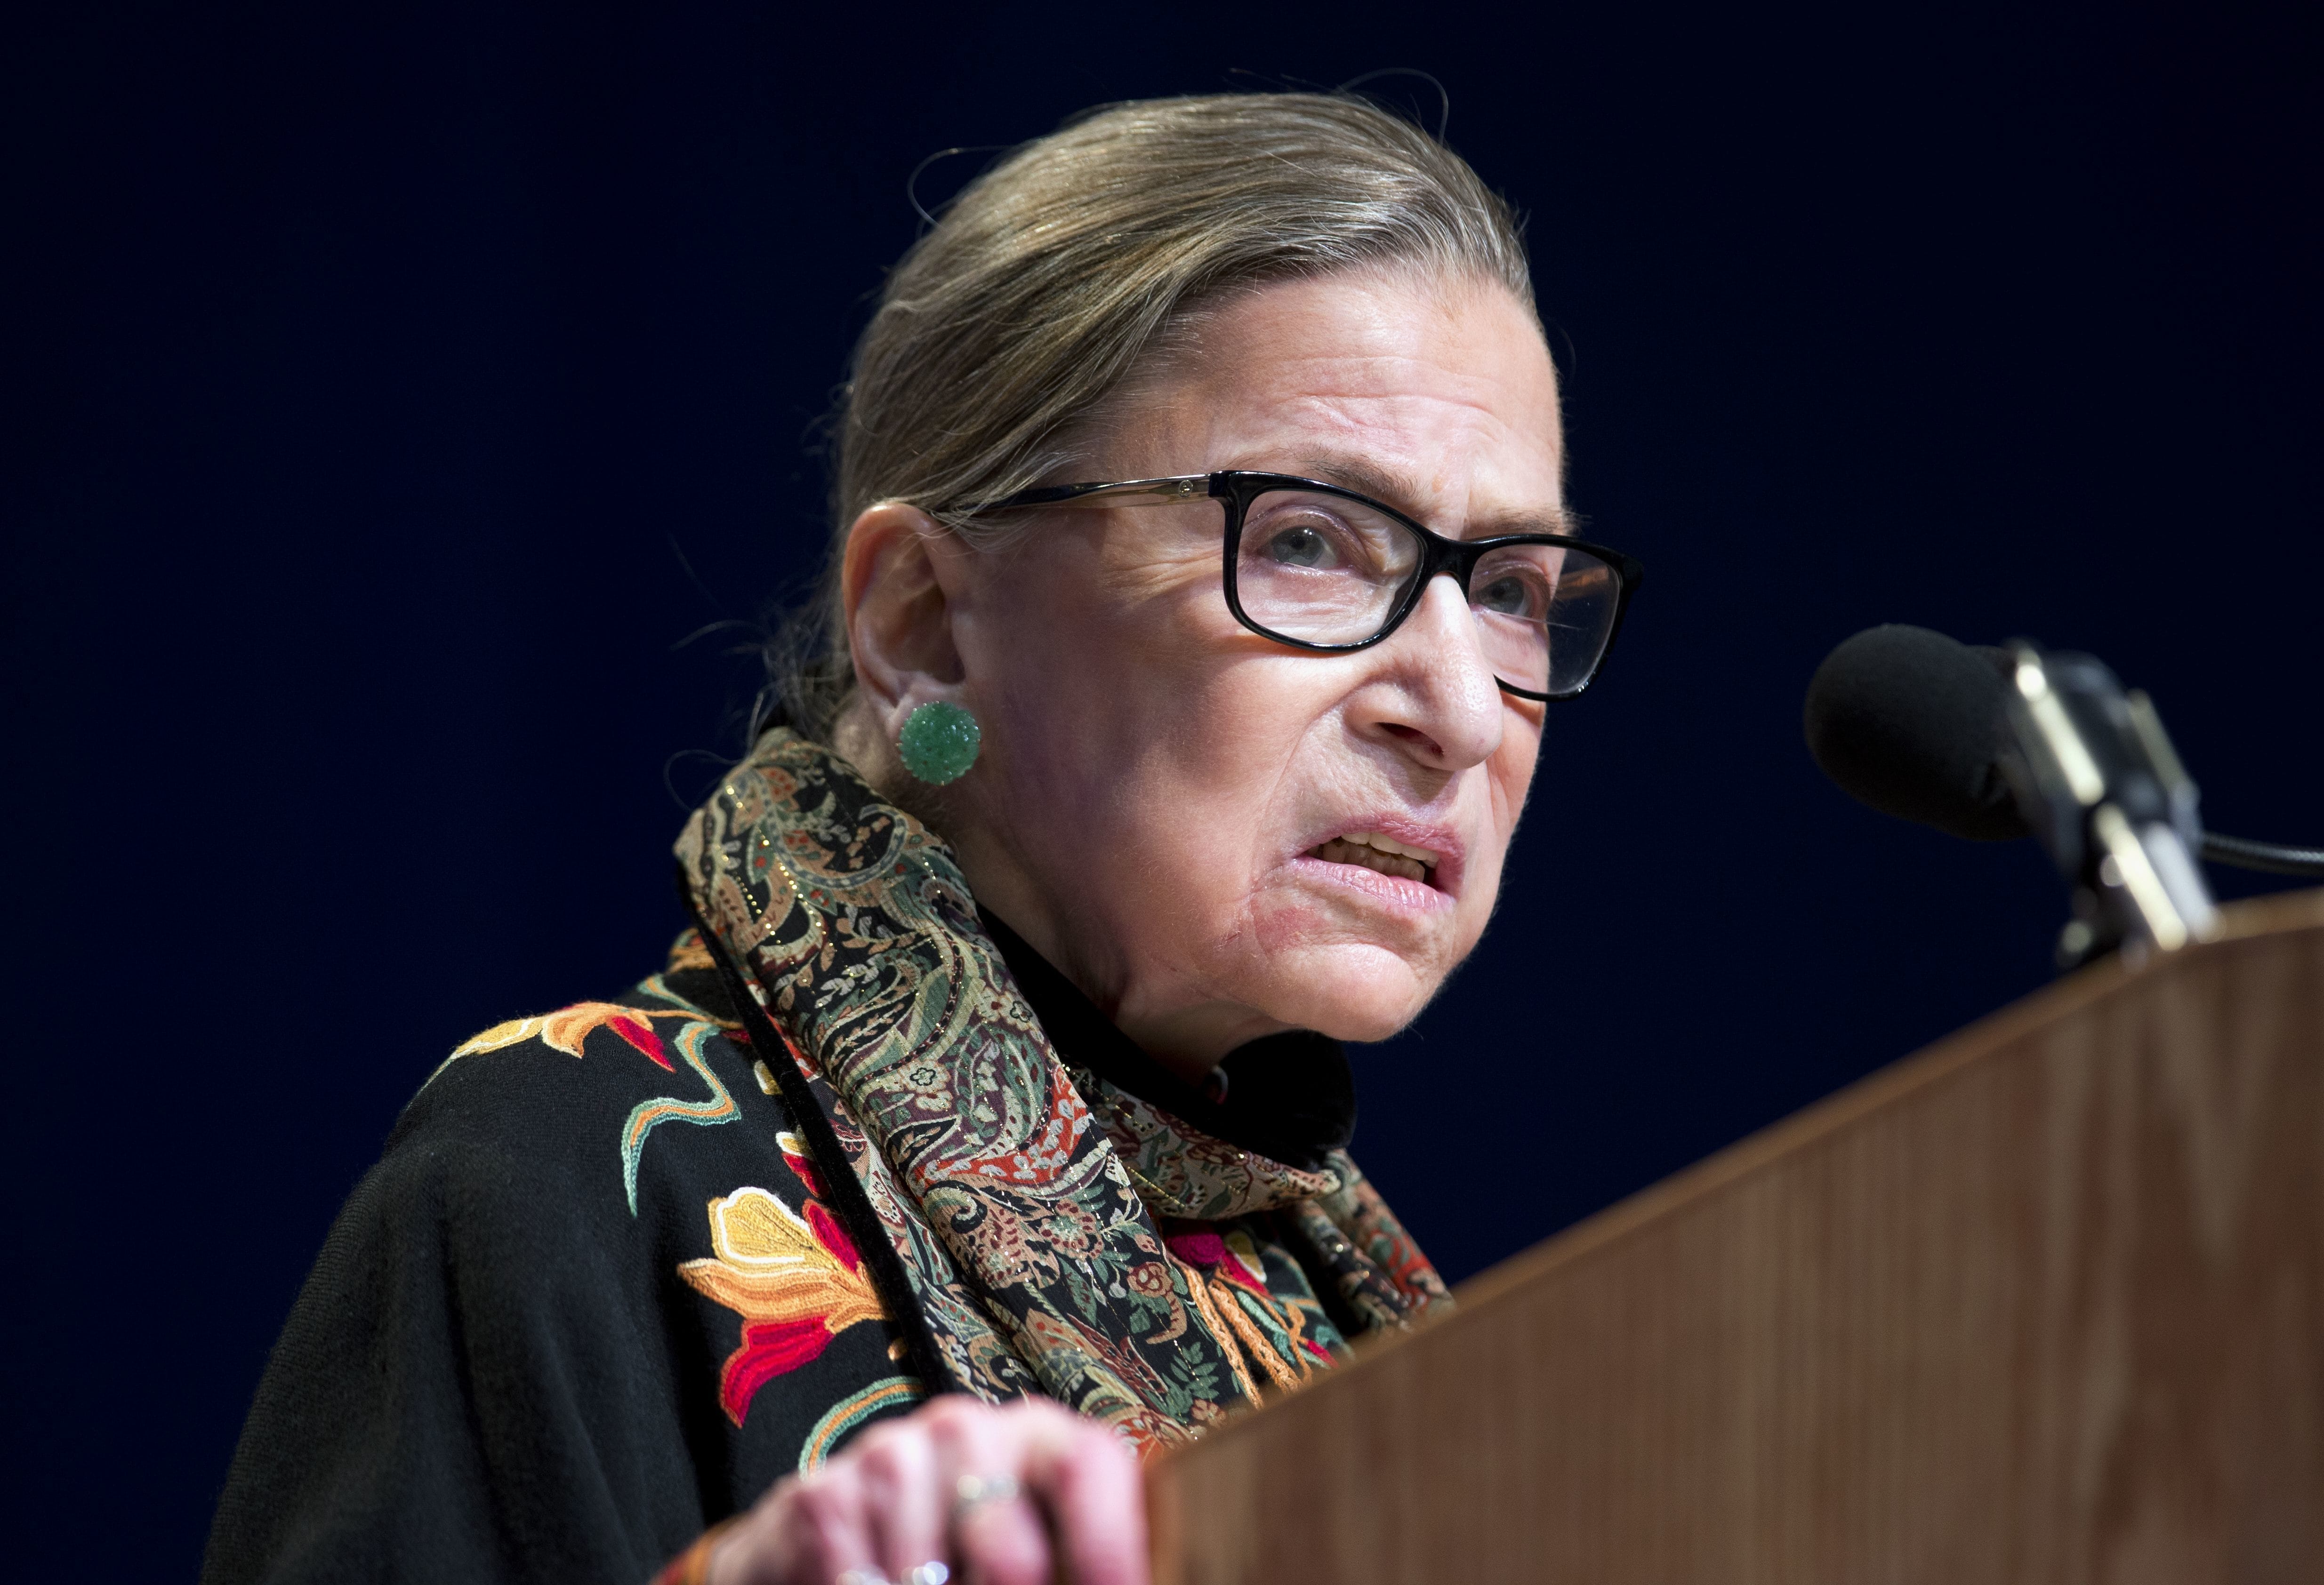 FILE - In this Jan. 28, 2016 file photo, Supreme Court Justice Ruth Bader Ginsburg speaks at Brandeis University in Waltham, Mass. Ginsburg says she regrets comments on Republican presidential candidate Donald Trump.